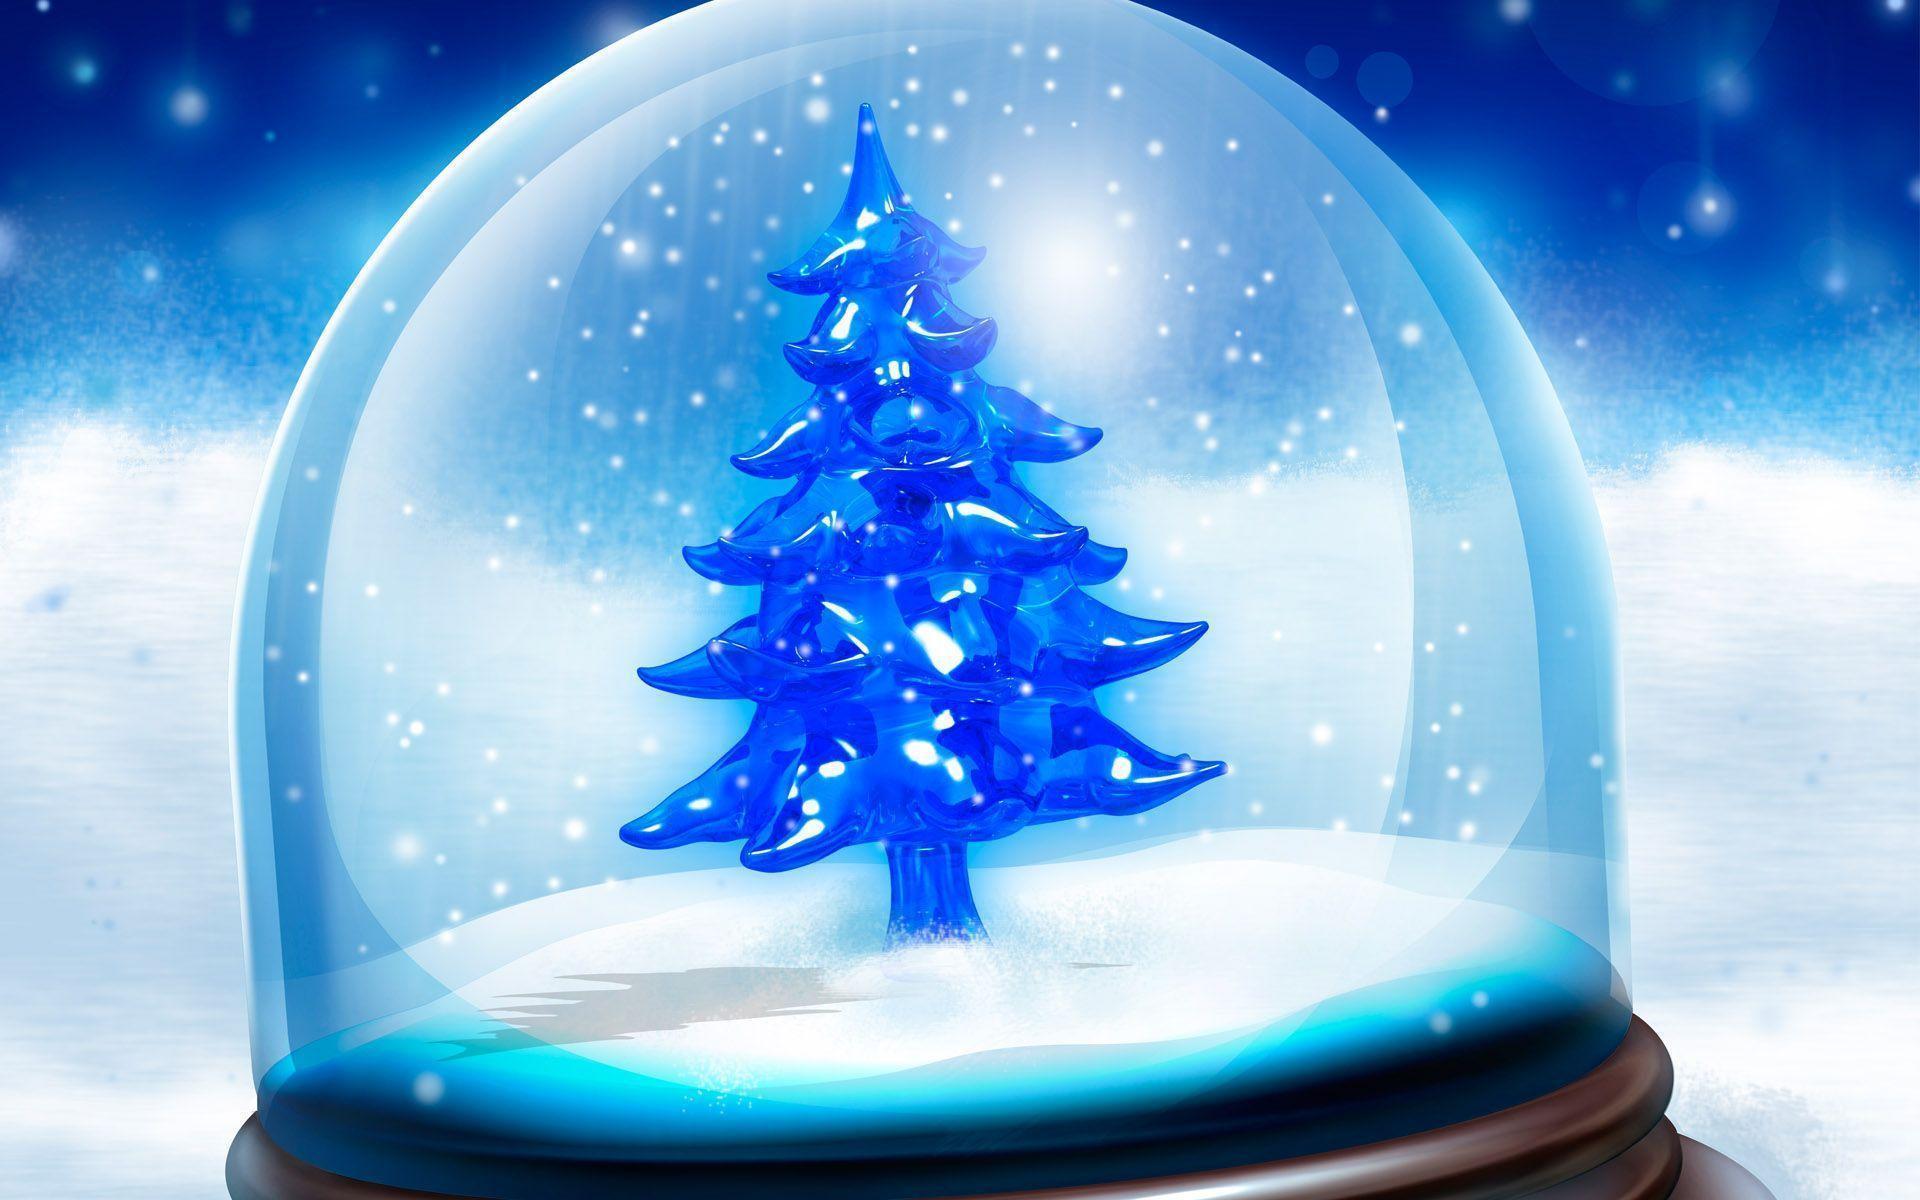 Free Snowy Christmas Tree wallpapers Wallpapers